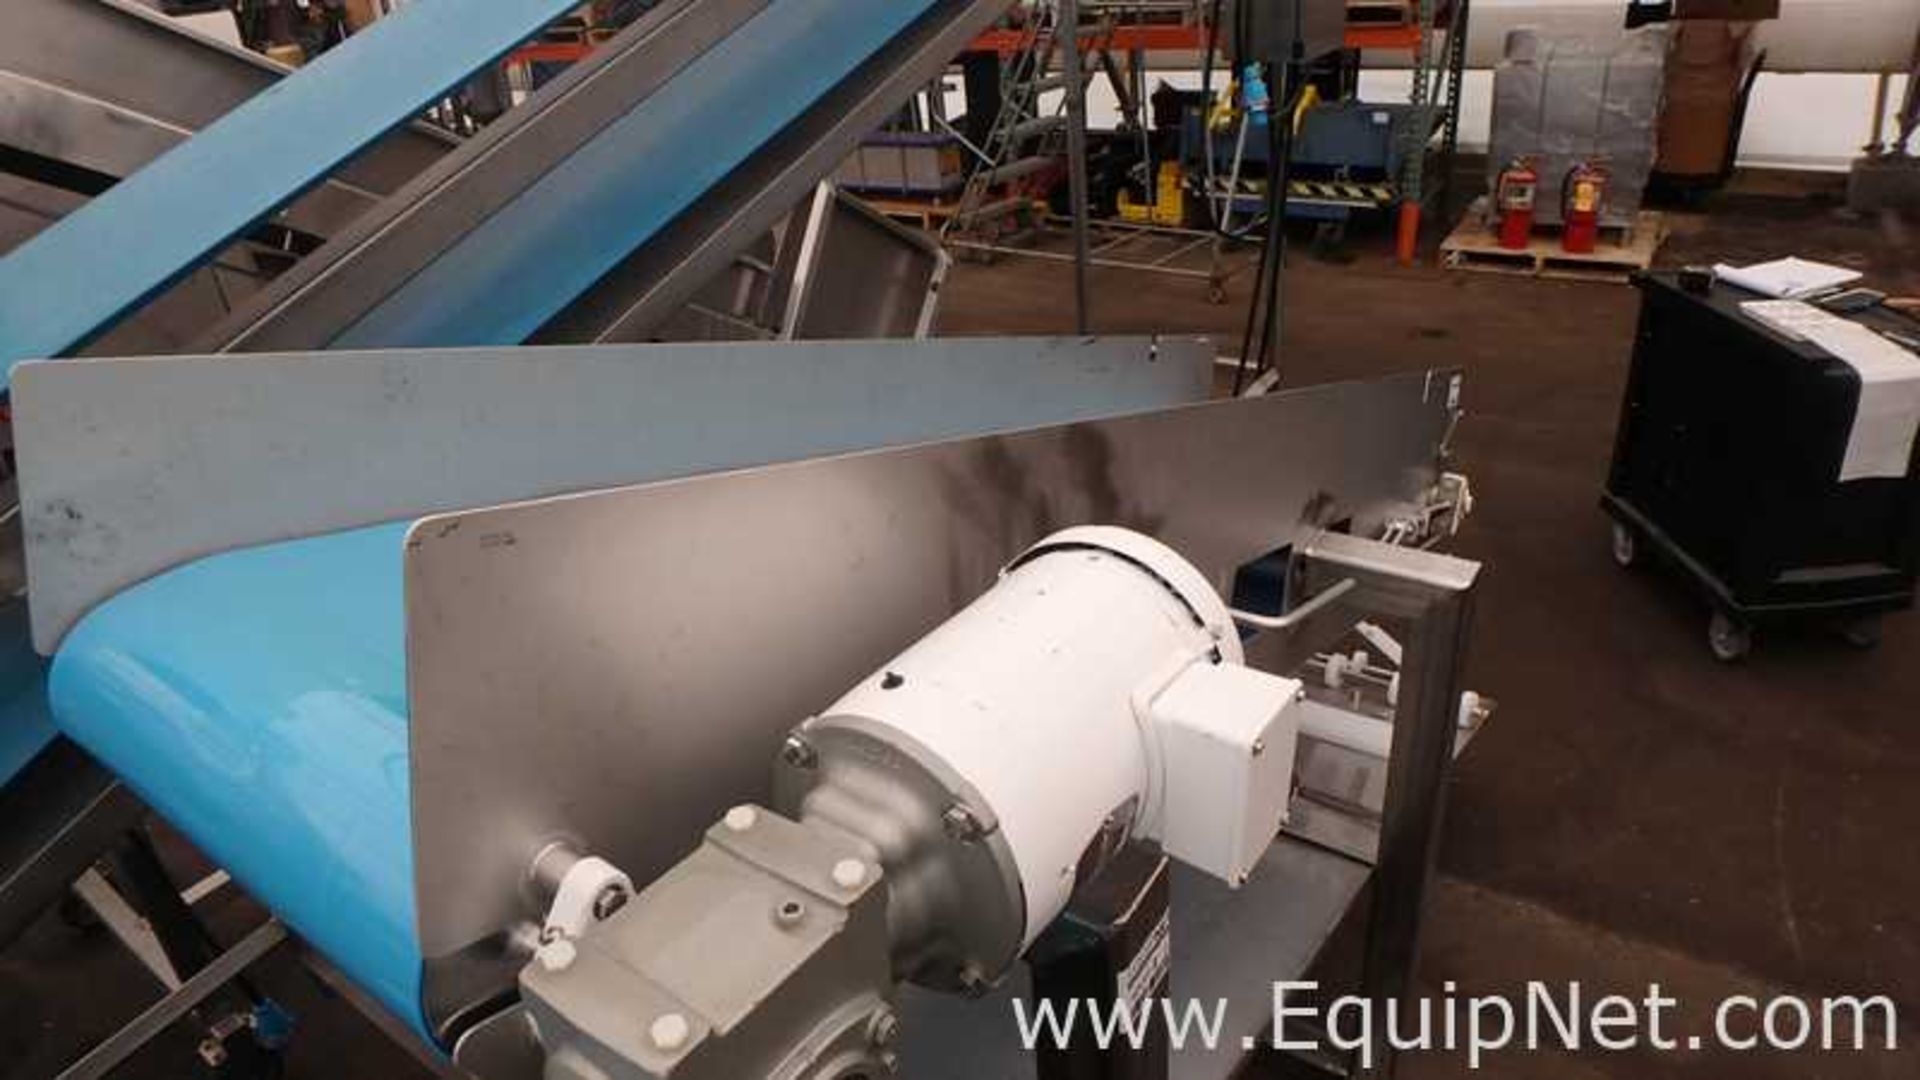 Stainless Steel Bulk Transfer Conveyor 16 Inches Wide With Small Decline - Image 6 of 6